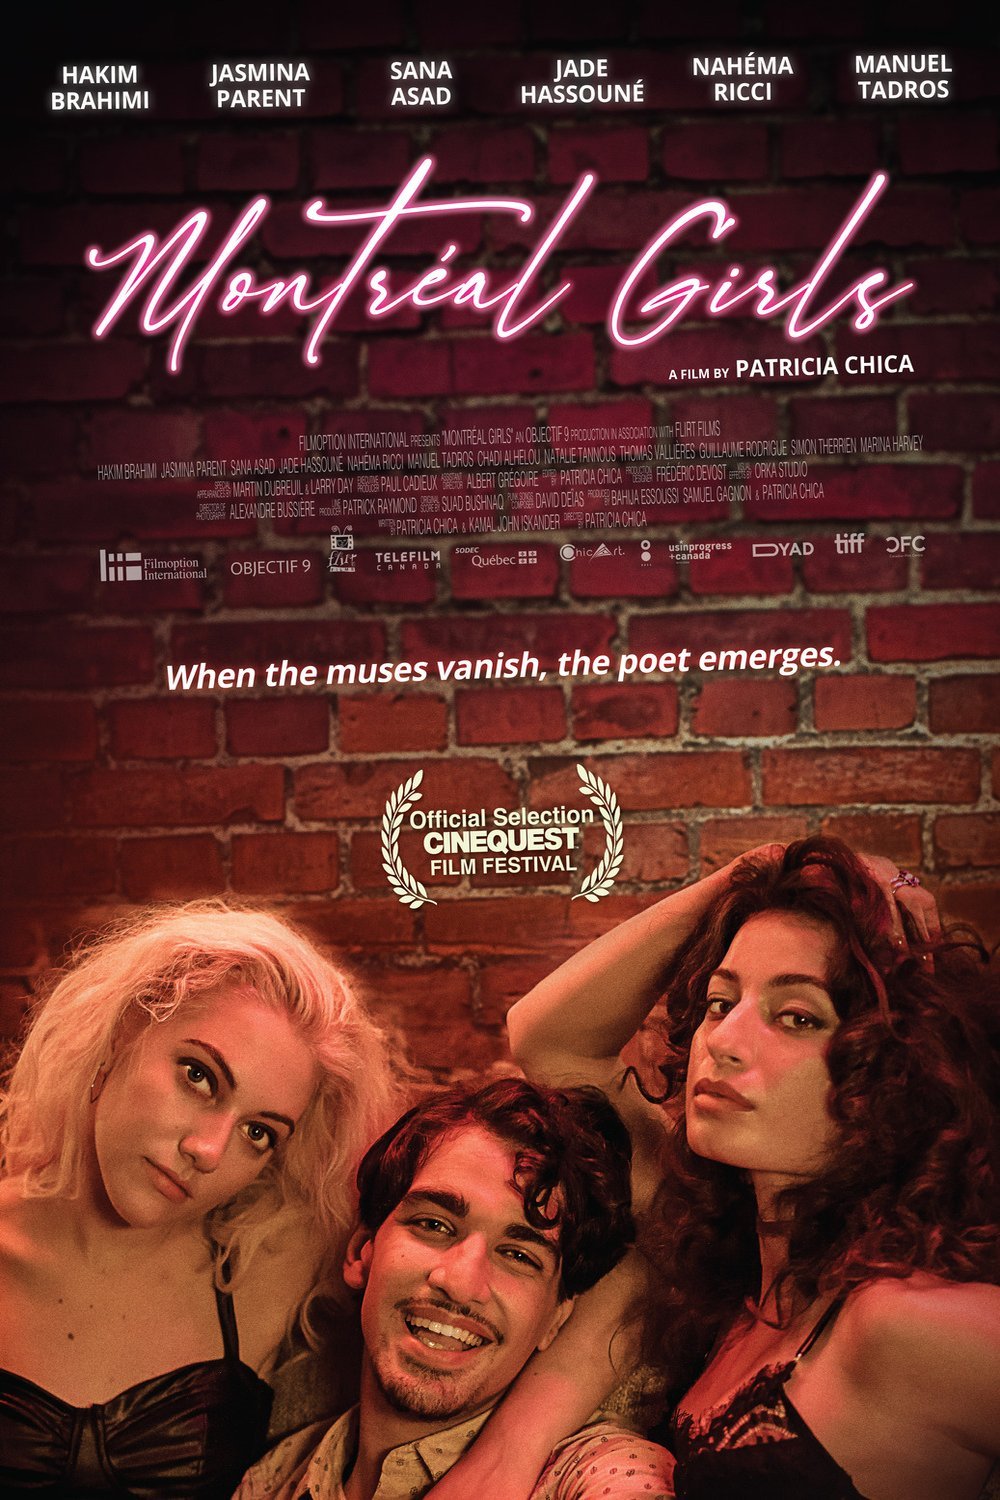 Poster of the movie Montréal Girls